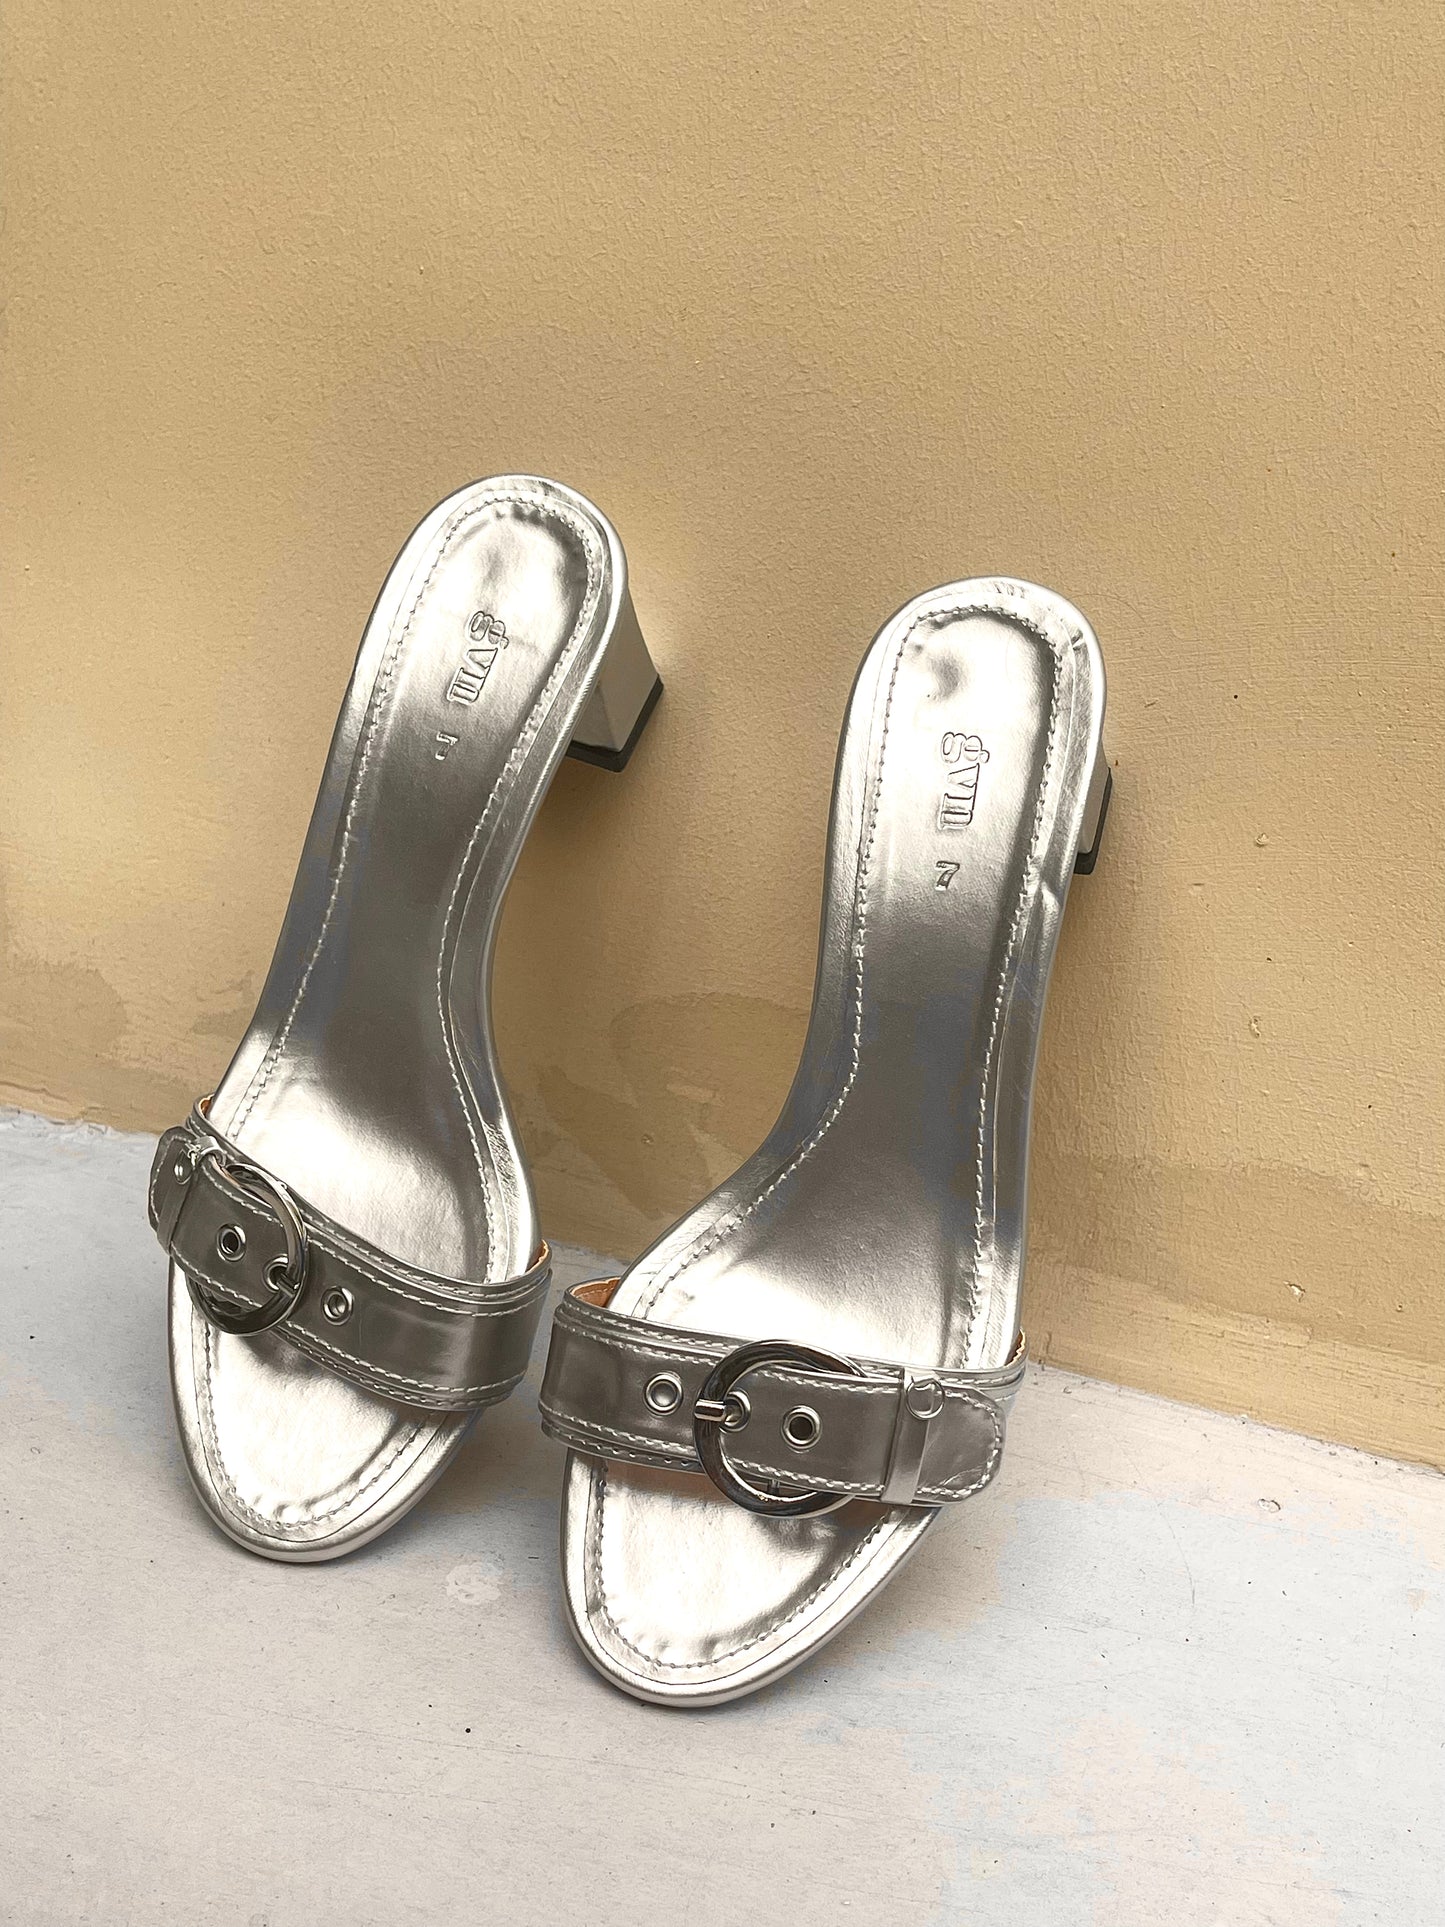 Sample 030: Rhode Heels in Patent Chrome - Size 7